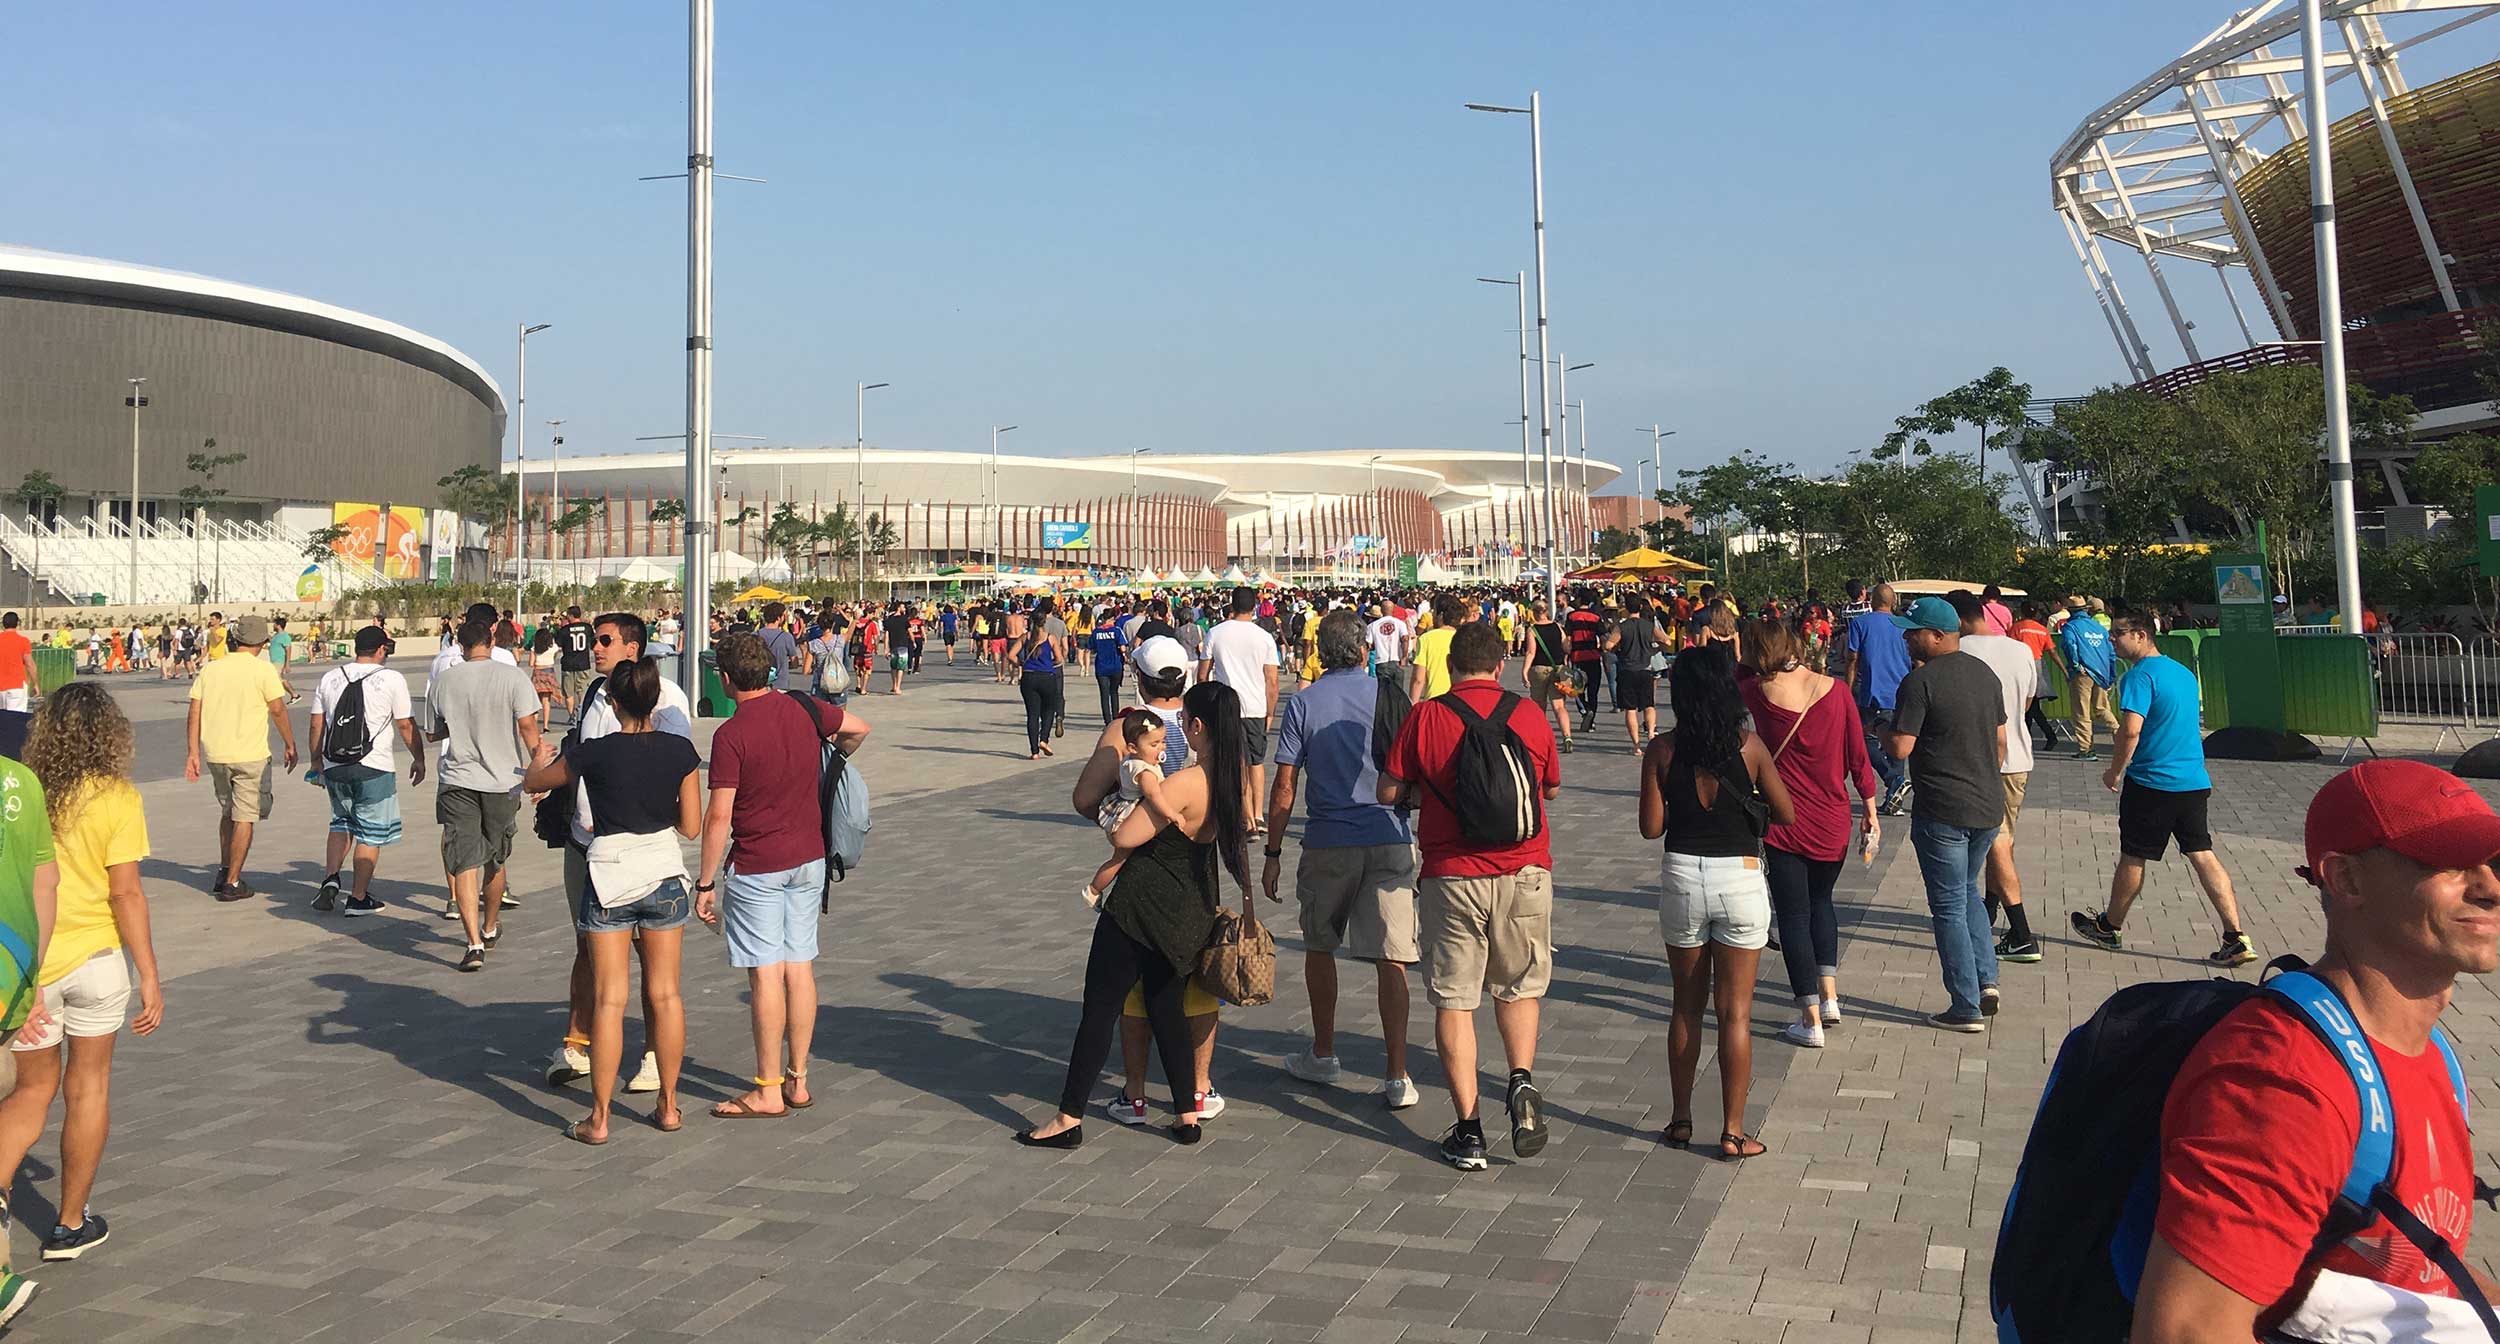 People congregate in the Olympic Park in Rio de Janerio, Brazil